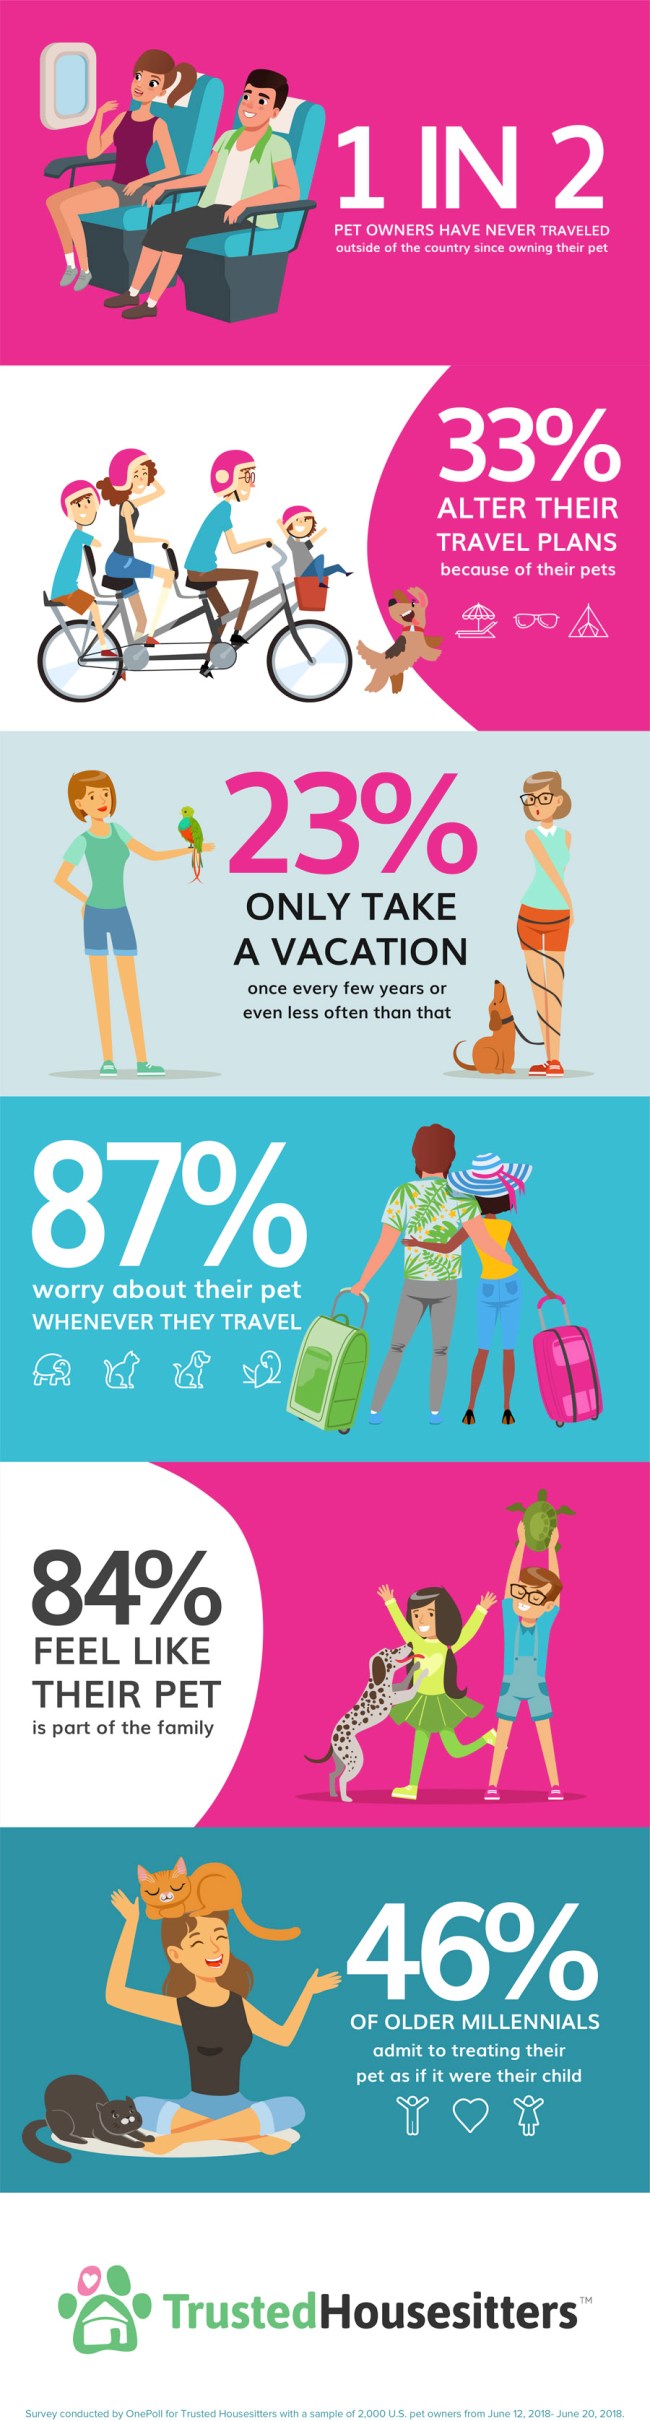 pet owners have never travelled